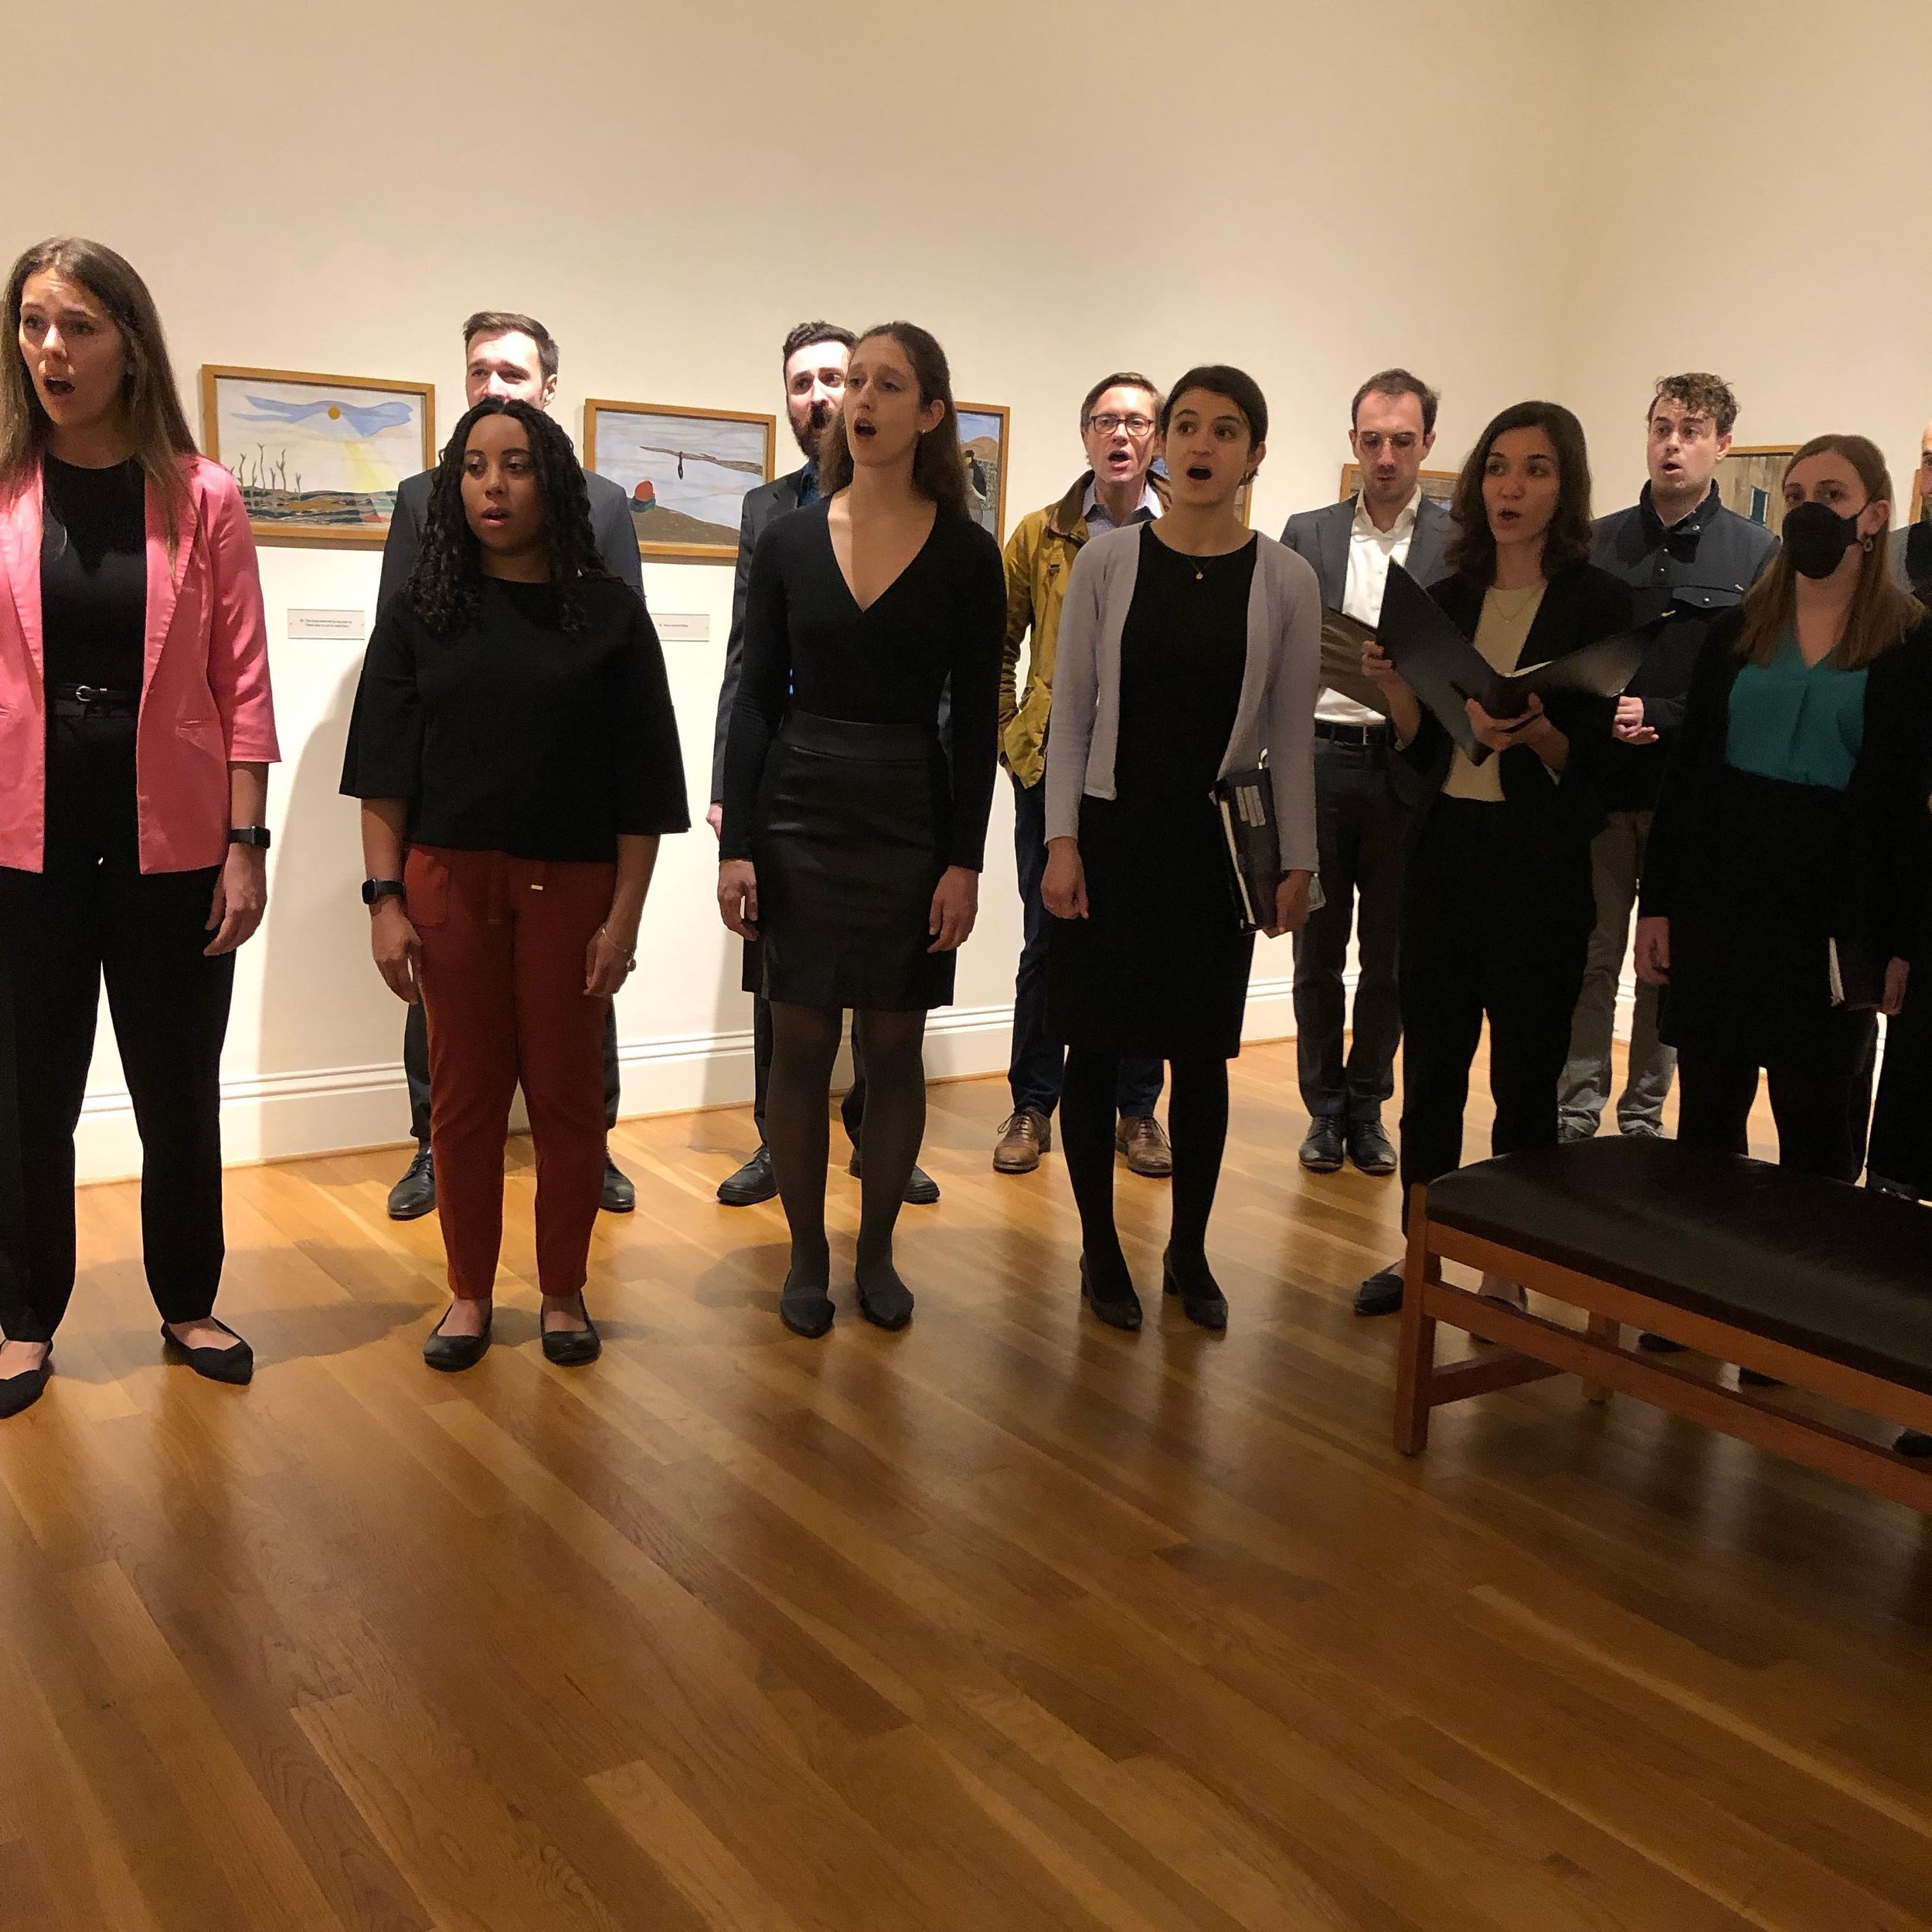 #tbt to warmups in an art gallery before an amazing gig at the @phillipscollection 🤯 such a cool experience and such a gorgeous sound!

Any time you want music for your paintings, give us a call! 

#18thstsingers #DCmusic #DCchoir #bestgigever #chor